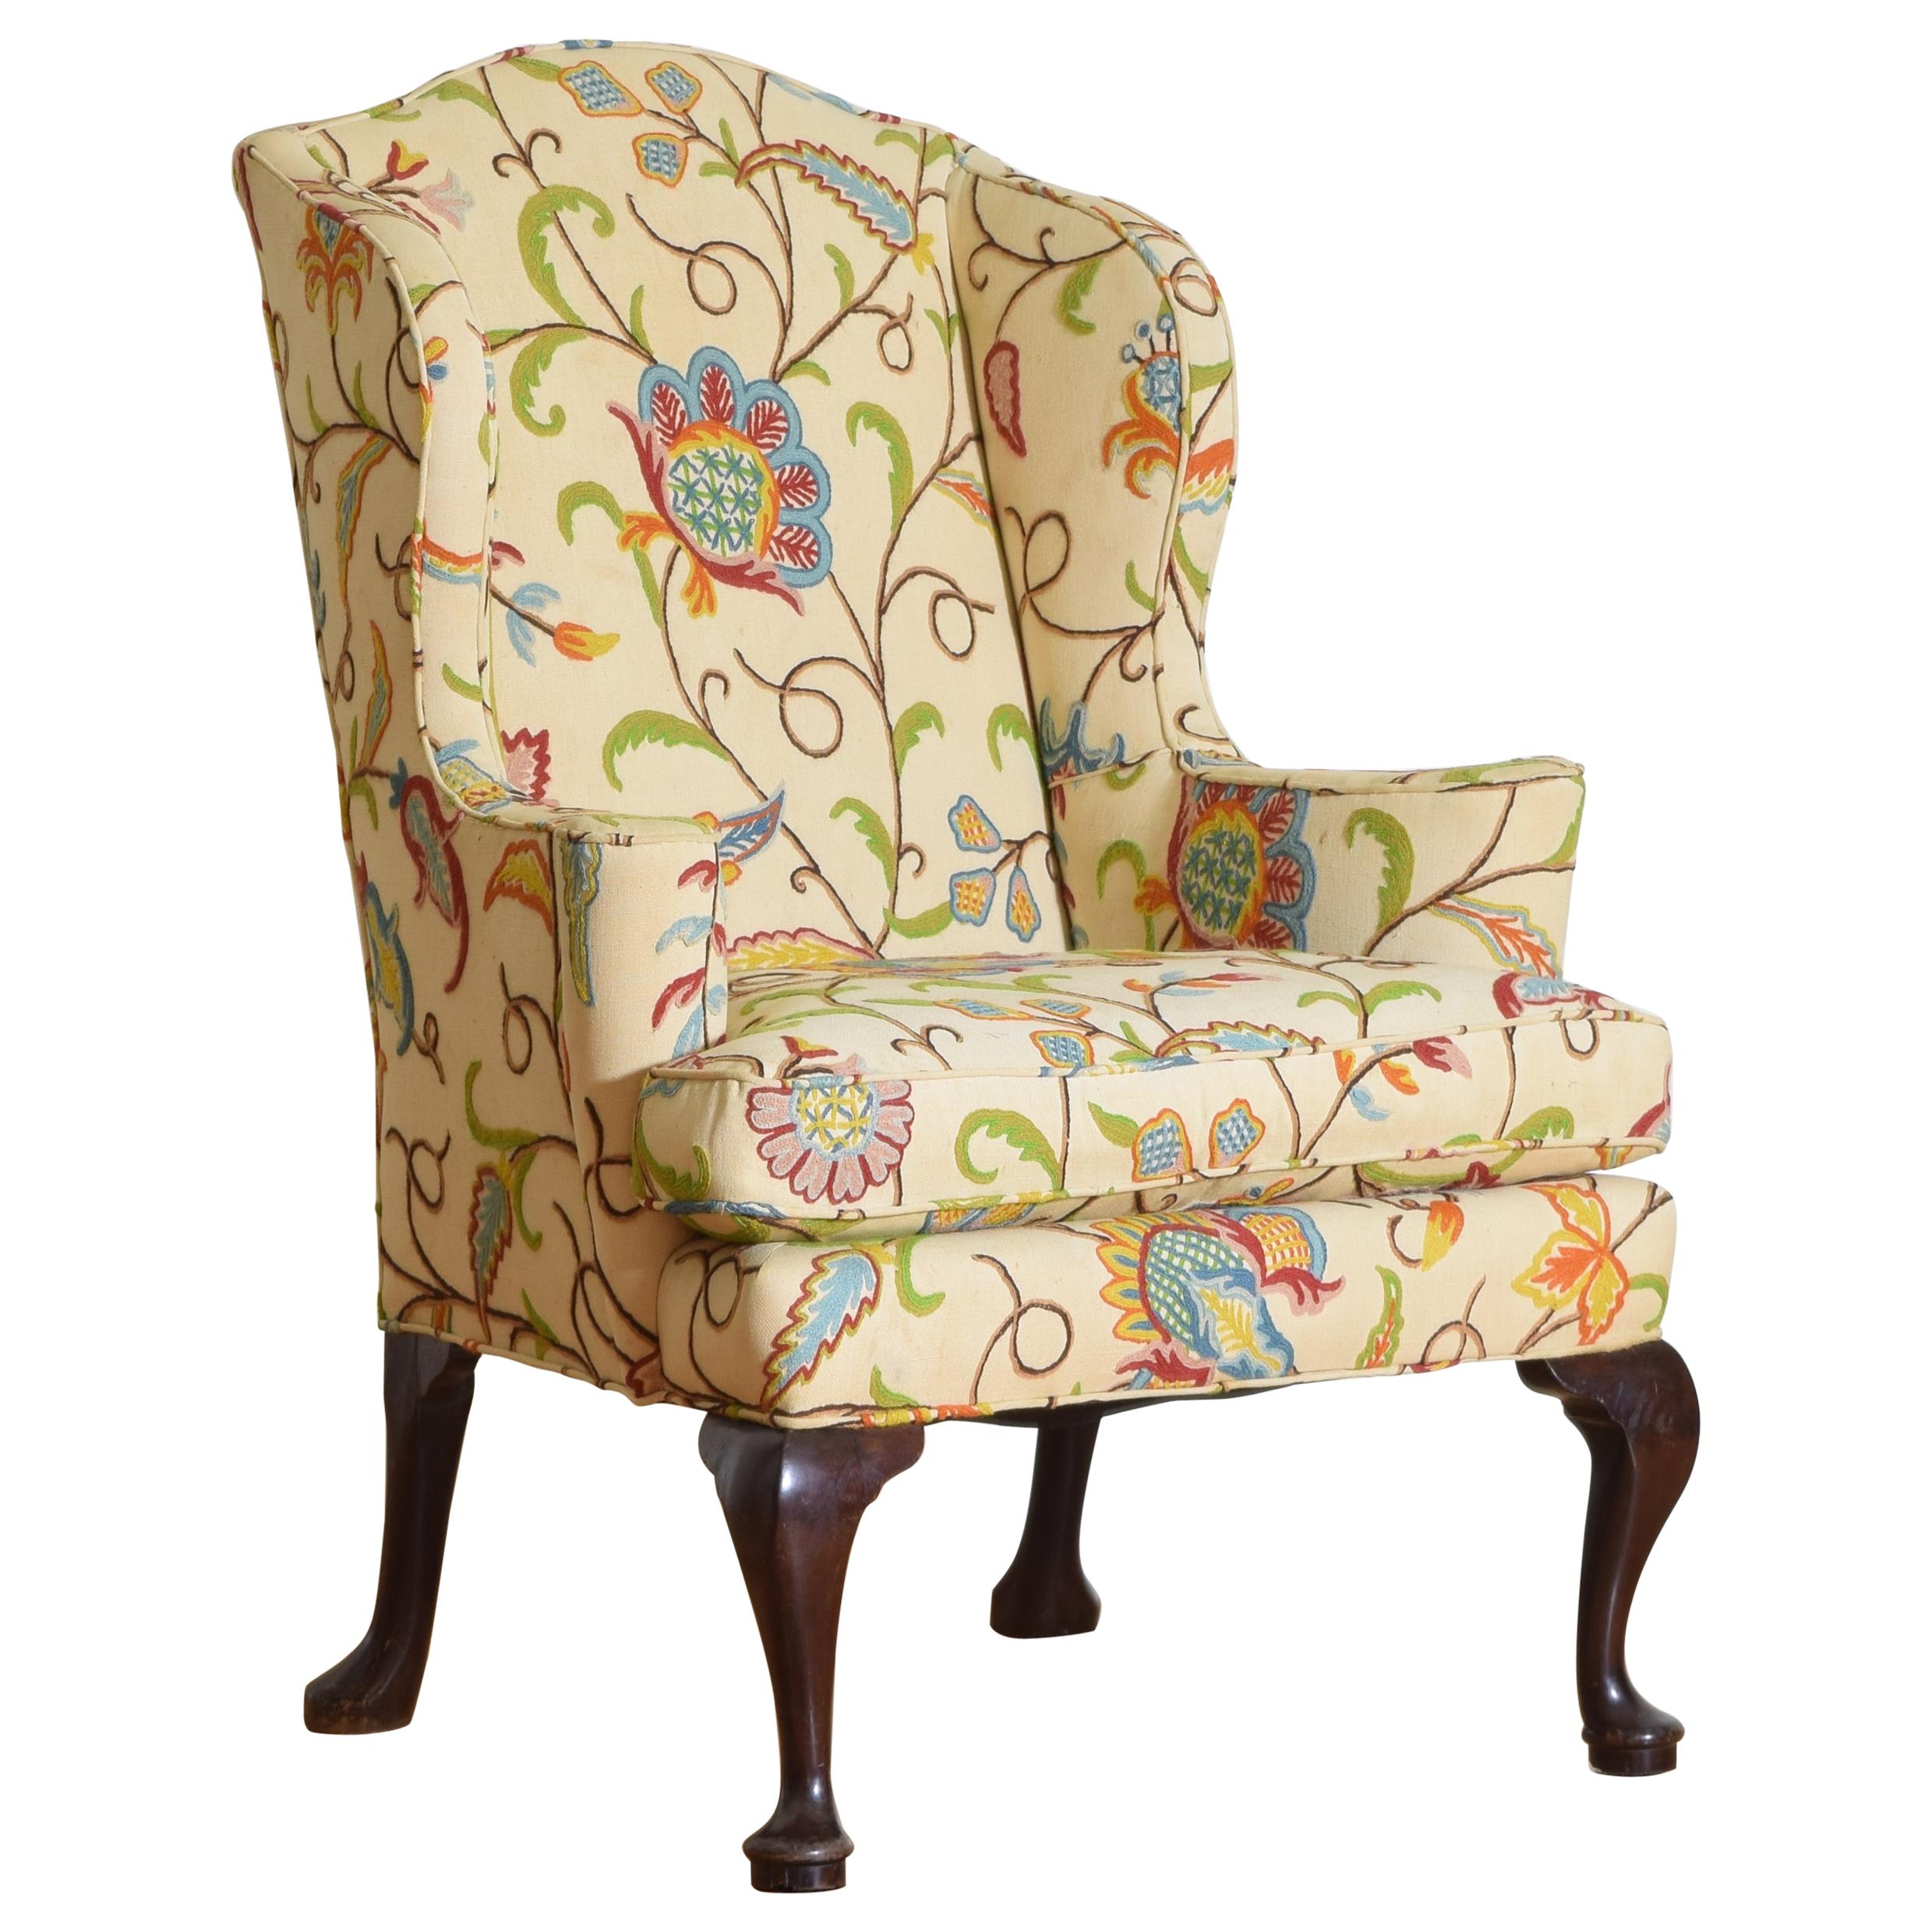 English Mahogany Queen Anne Style Crewel Work Upholstered Wingchair, ca. 1900